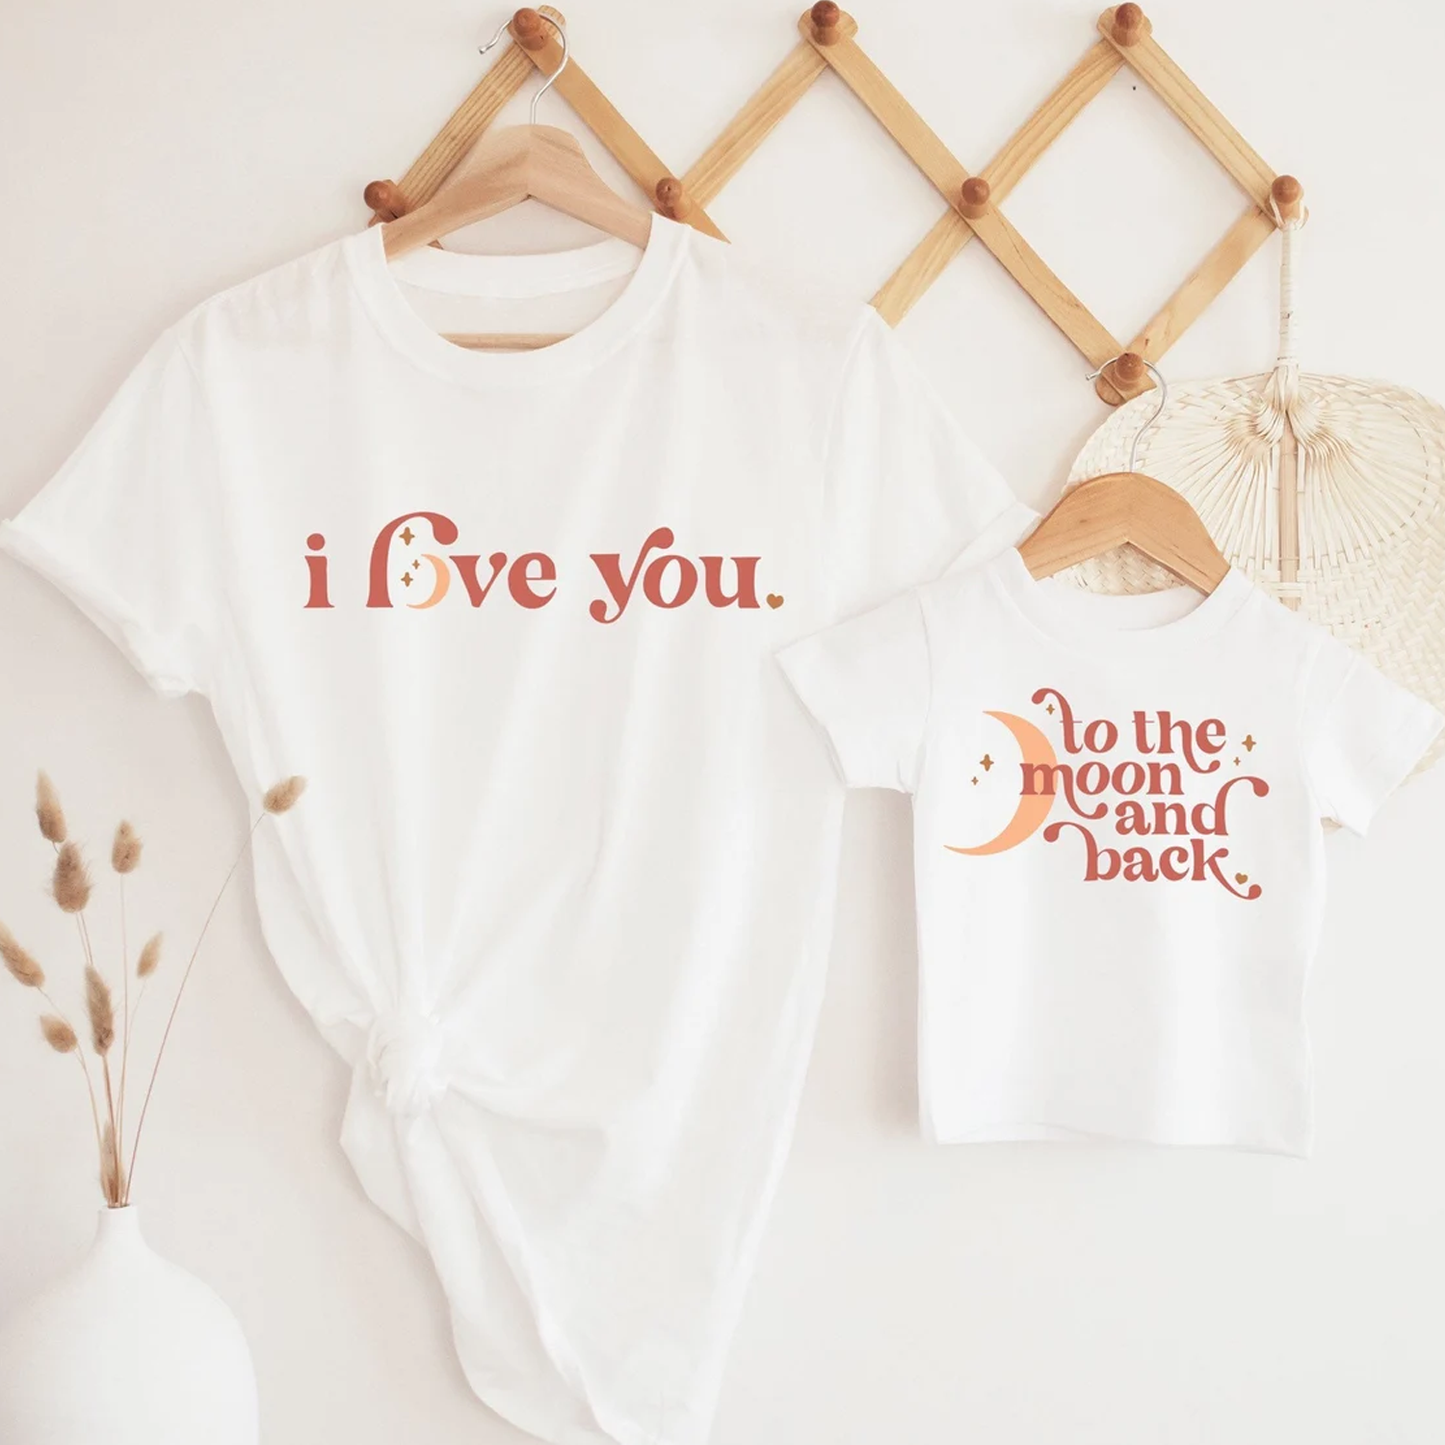 Love You - To the Moon and Back Boho Style White Twinning T-Shirts